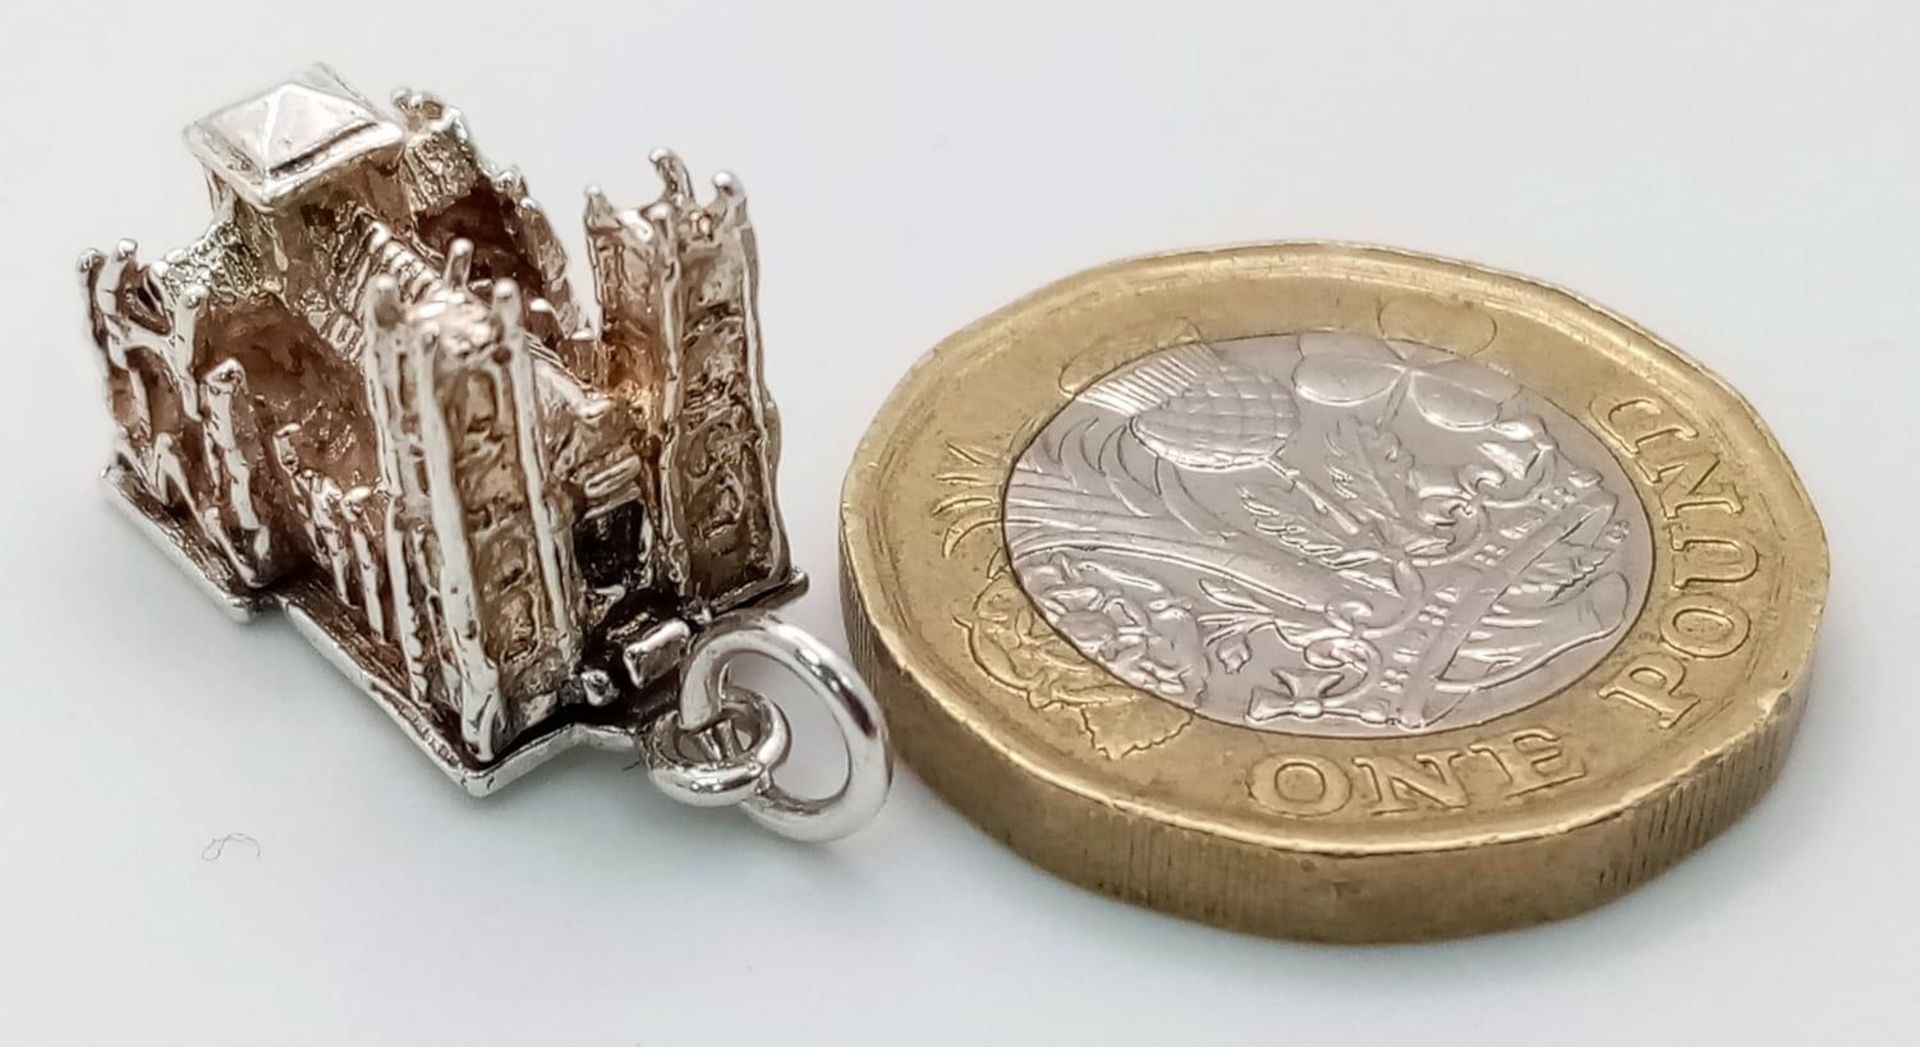 STERLING SILVER WESTMINSTER ABBEY CHARM WHICH OPENS TO REVEAL A BIBLE, WEIGHT 6G - Image 5 of 5